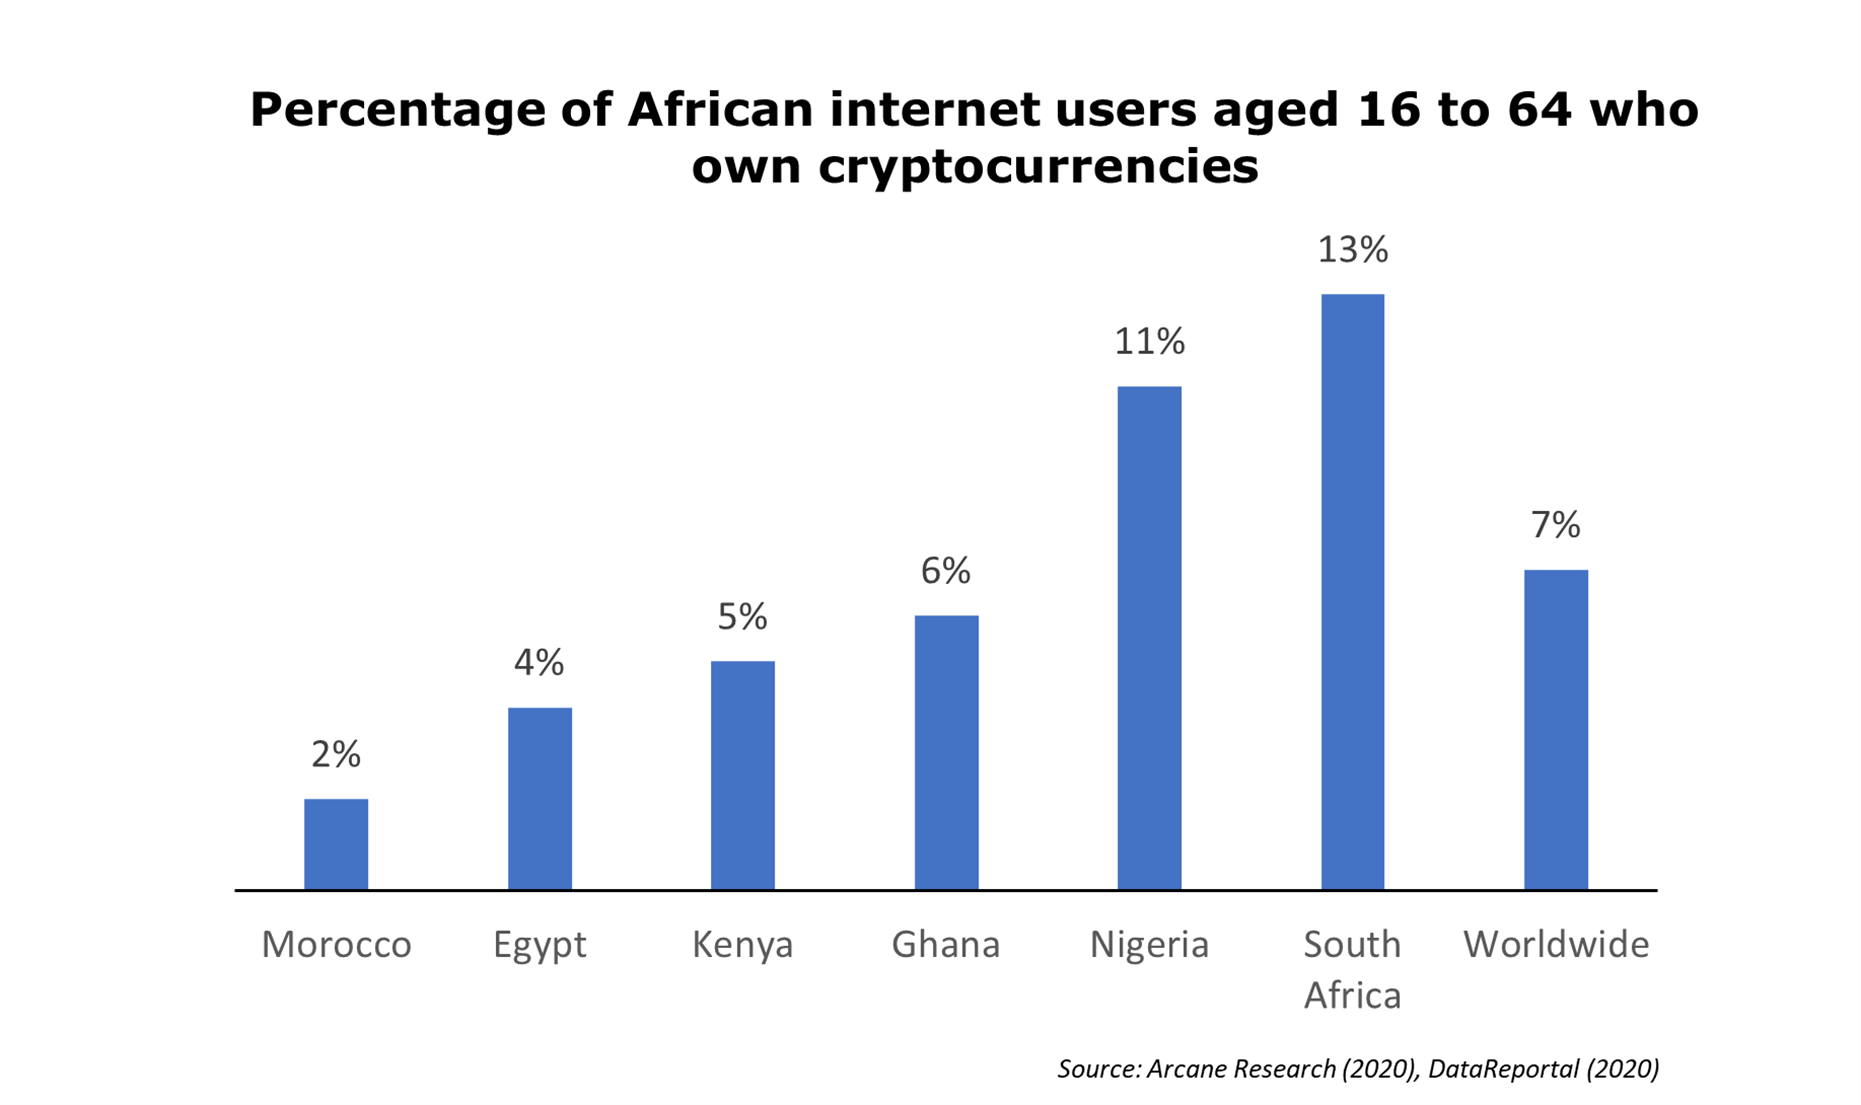 Figure of percentage of African internet users aged 16 to 64 who own cryptocurrencies